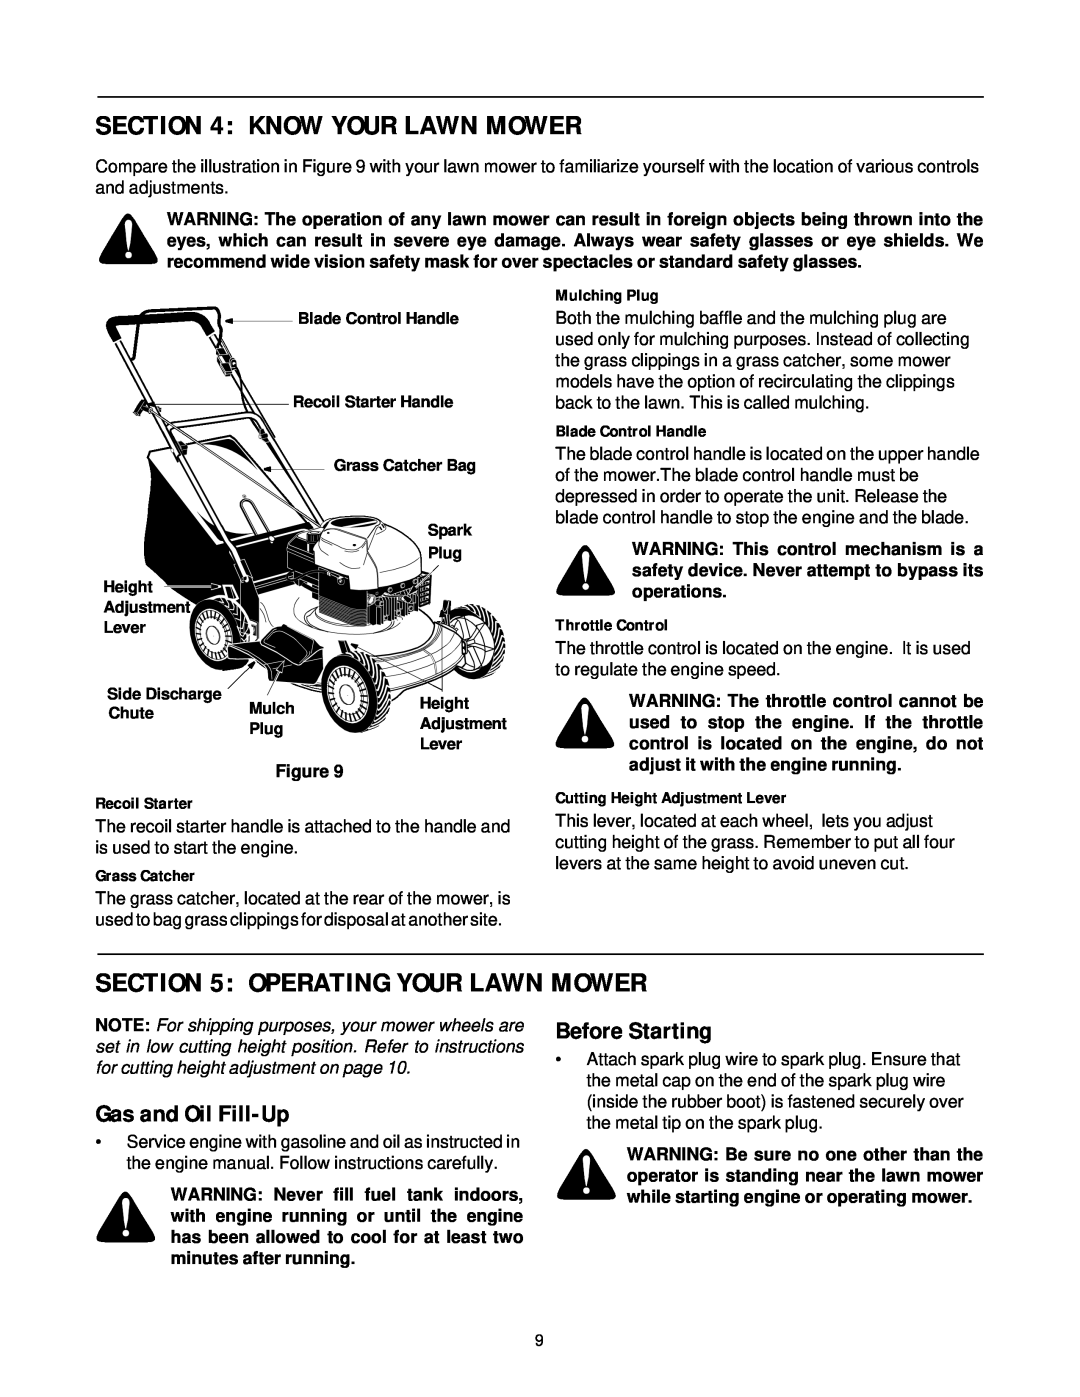 White Outdoor LC-436 Know Your Lawn Mower, Operating Your Lawn Mower, Gas and Oil Fill-Up, Before Starting, Mulching Plug 